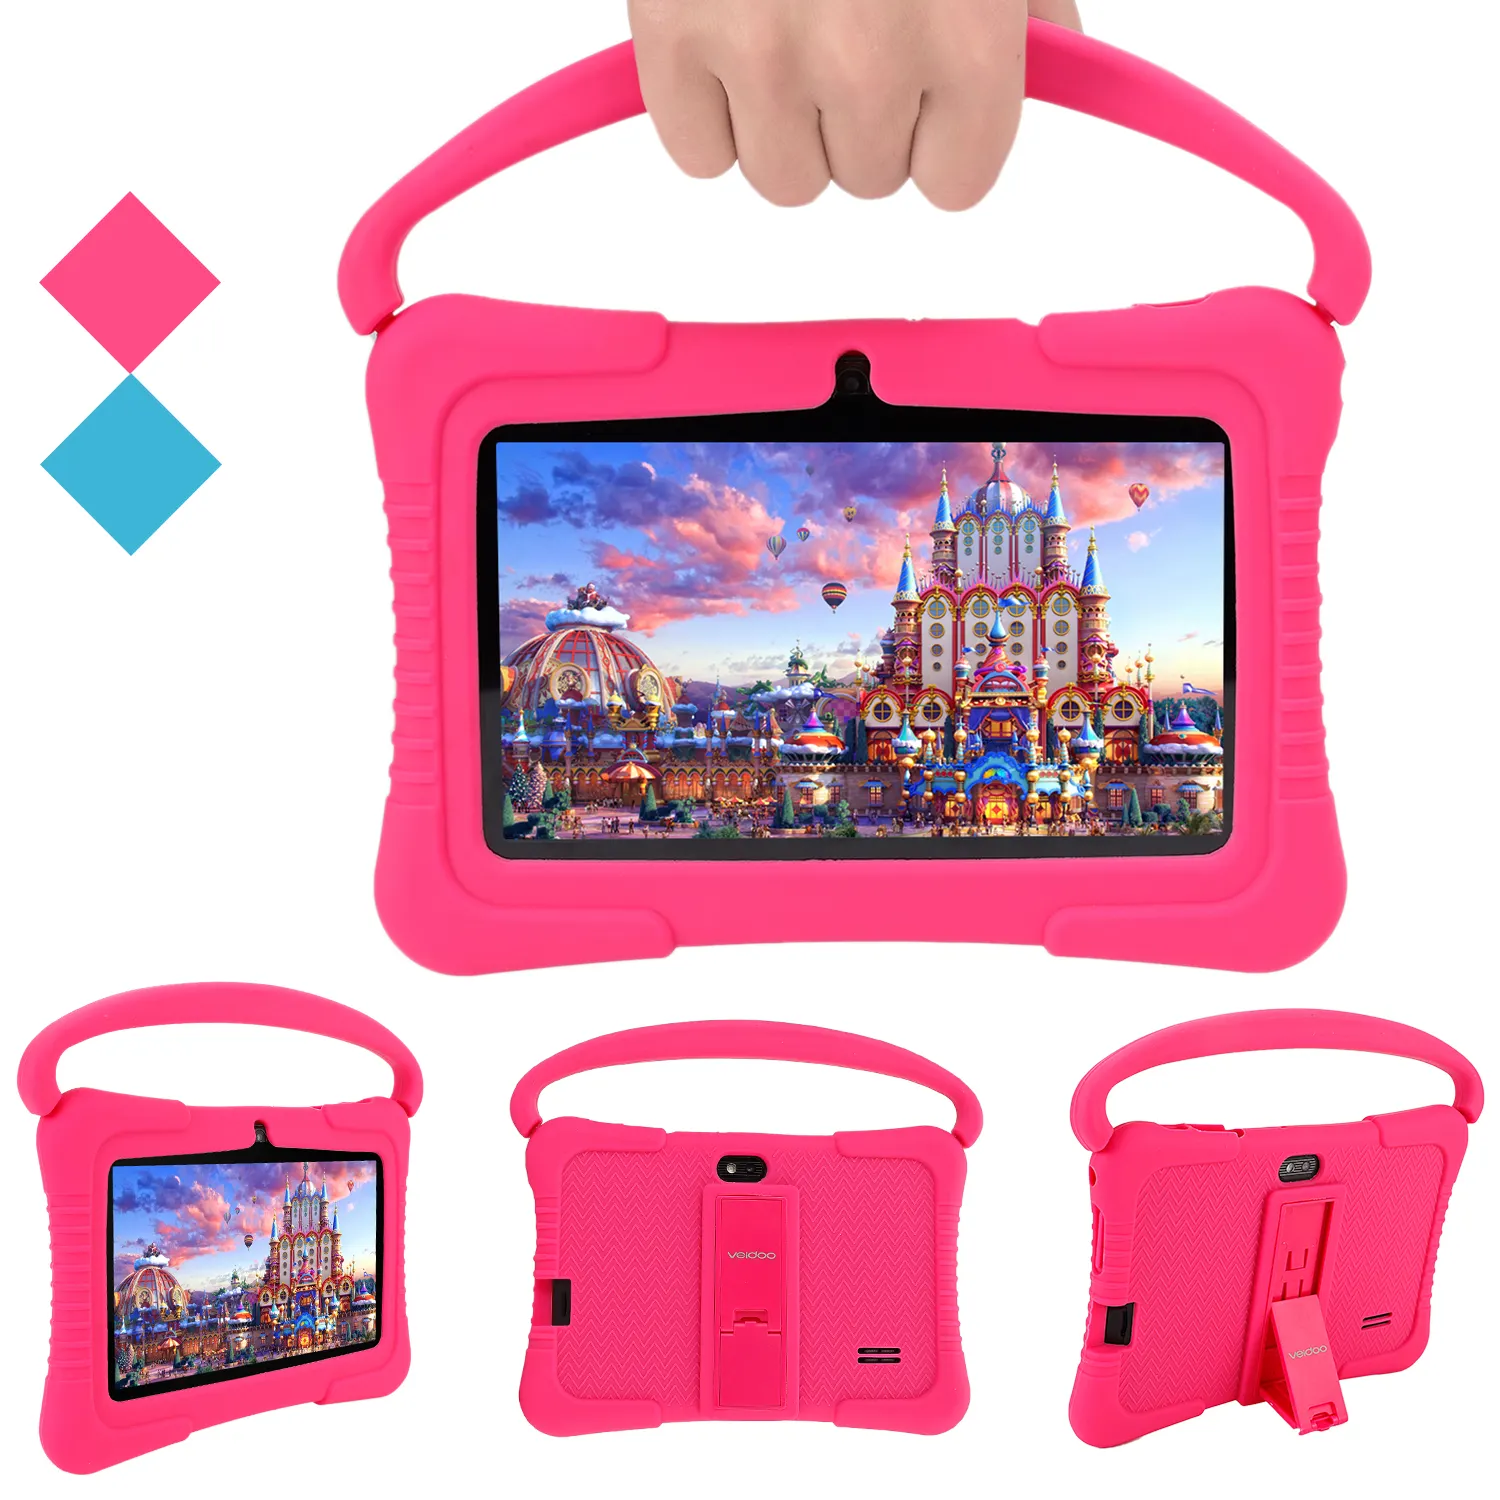 Discount 7" Kids Tablet Eye Protection HD Display 7 Inch Tablets Parent Control Pre-Installed Educational APP Android Tablet PC